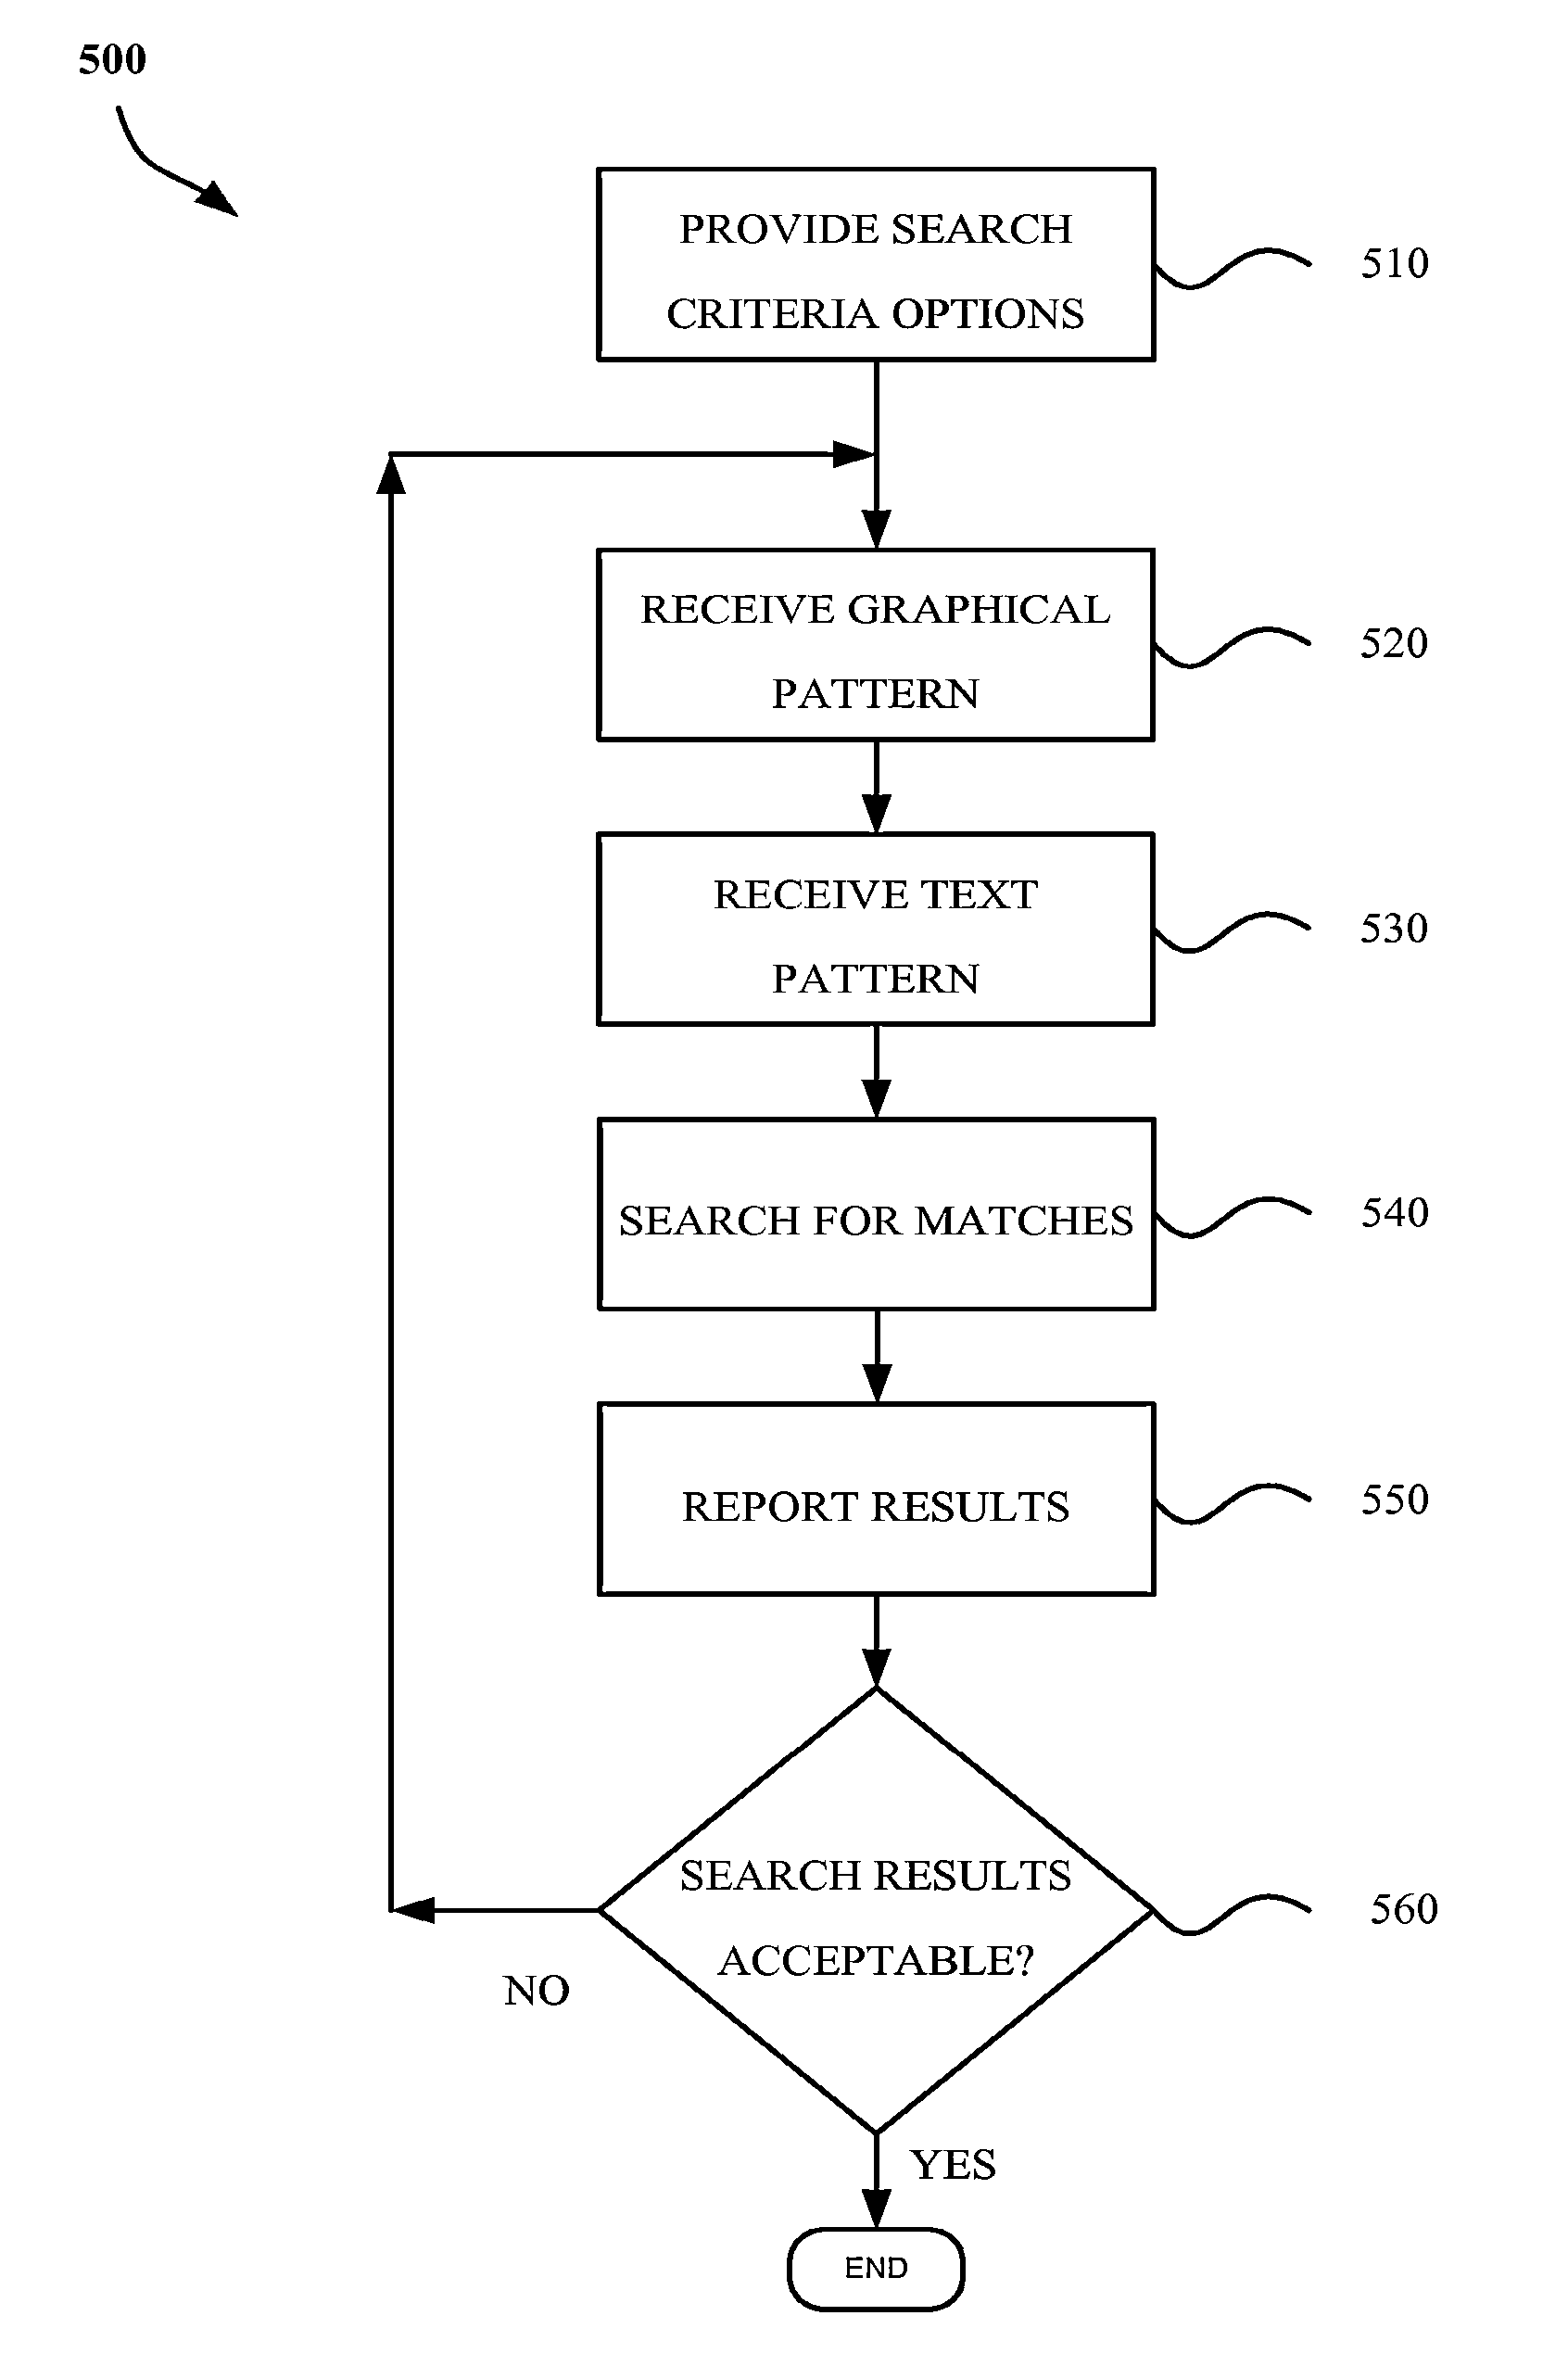 System and method of detecting design rule noncompliant subgraphs in circuit netlists